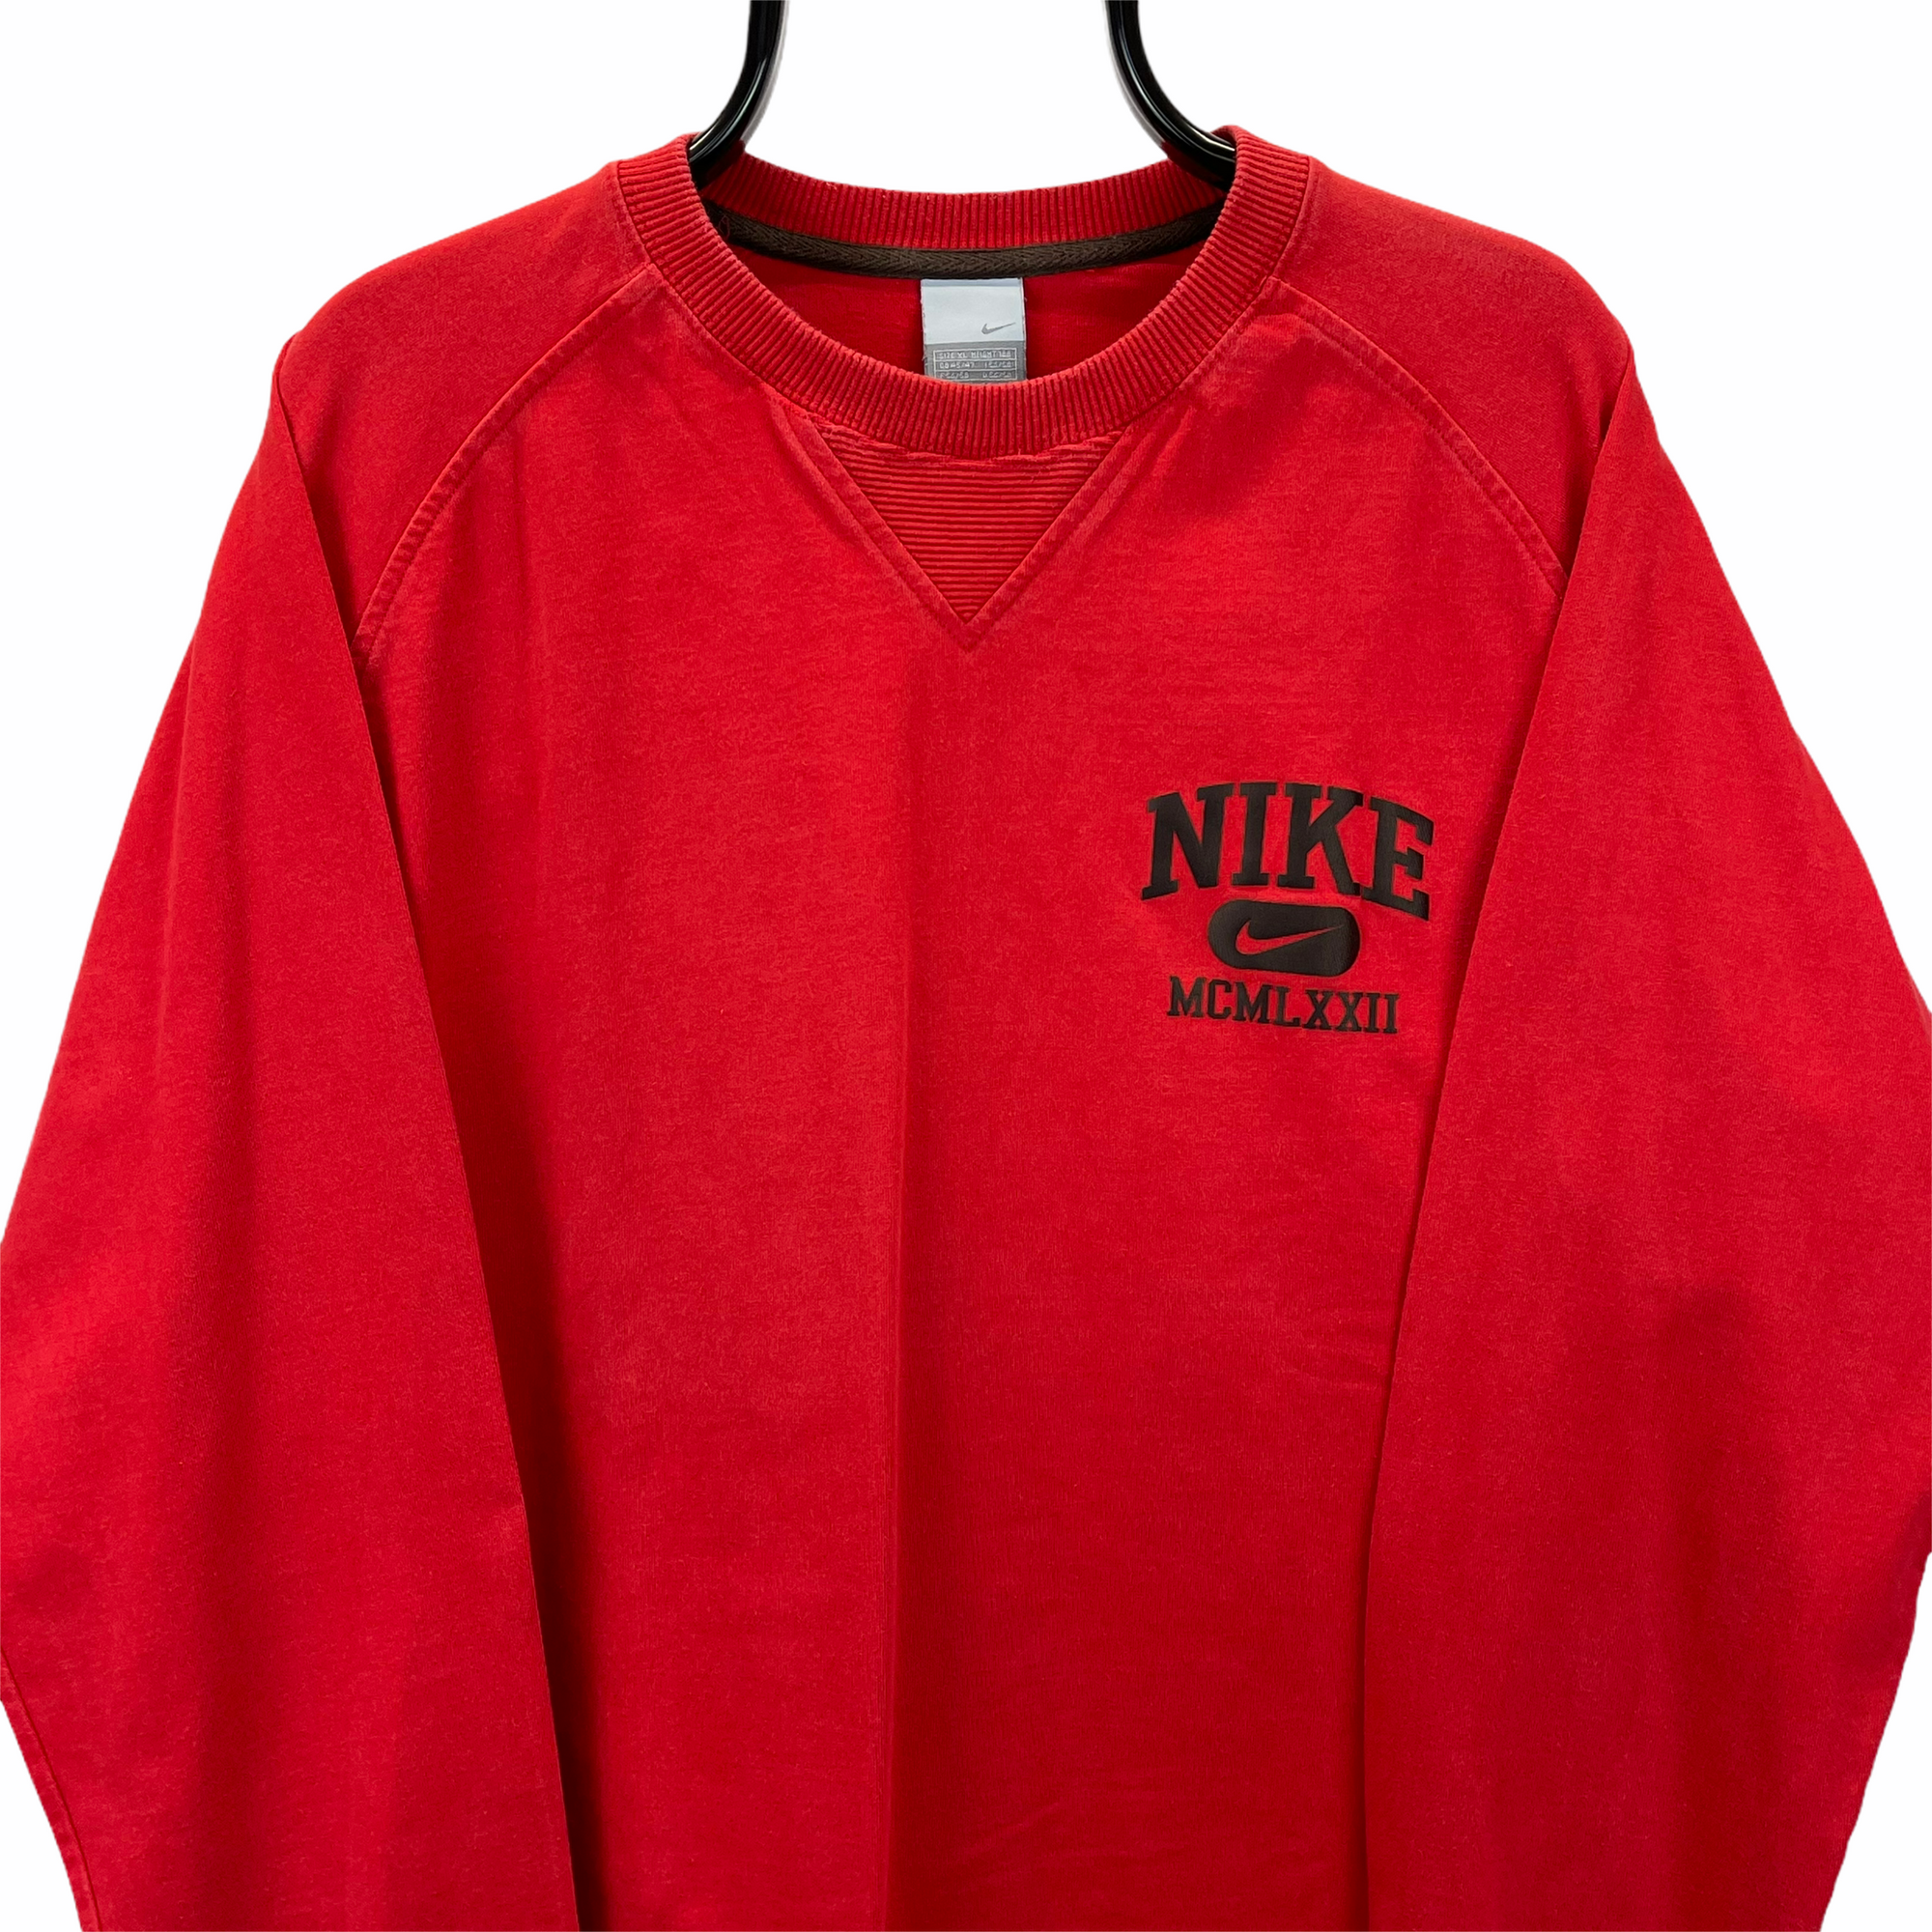 Vintage Nike Small Spellout Sweatshirt in Red - Men's Large/Women's XL